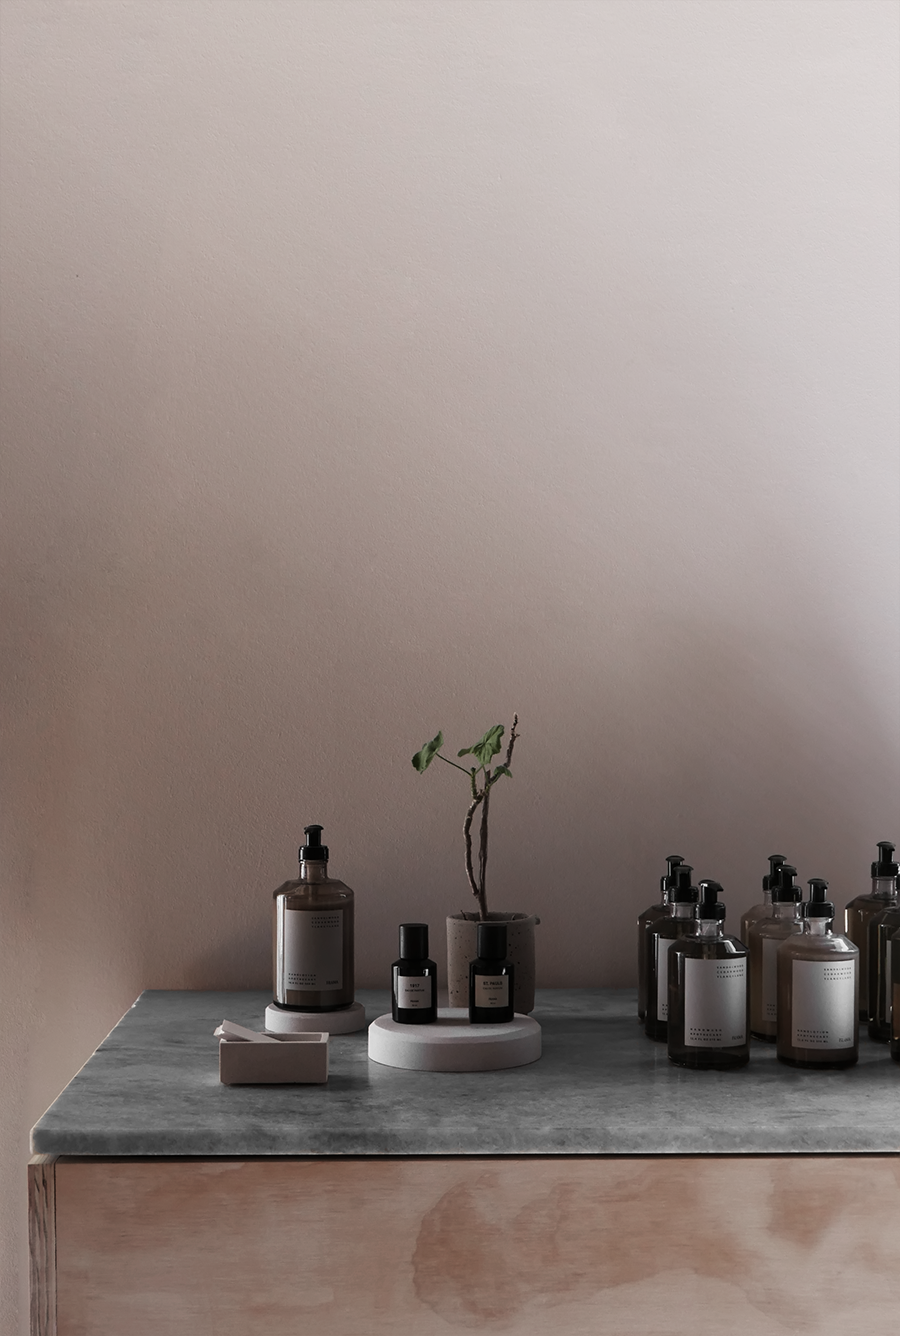 OUUR COLLECTION BY KINFOLK AT FRAMA